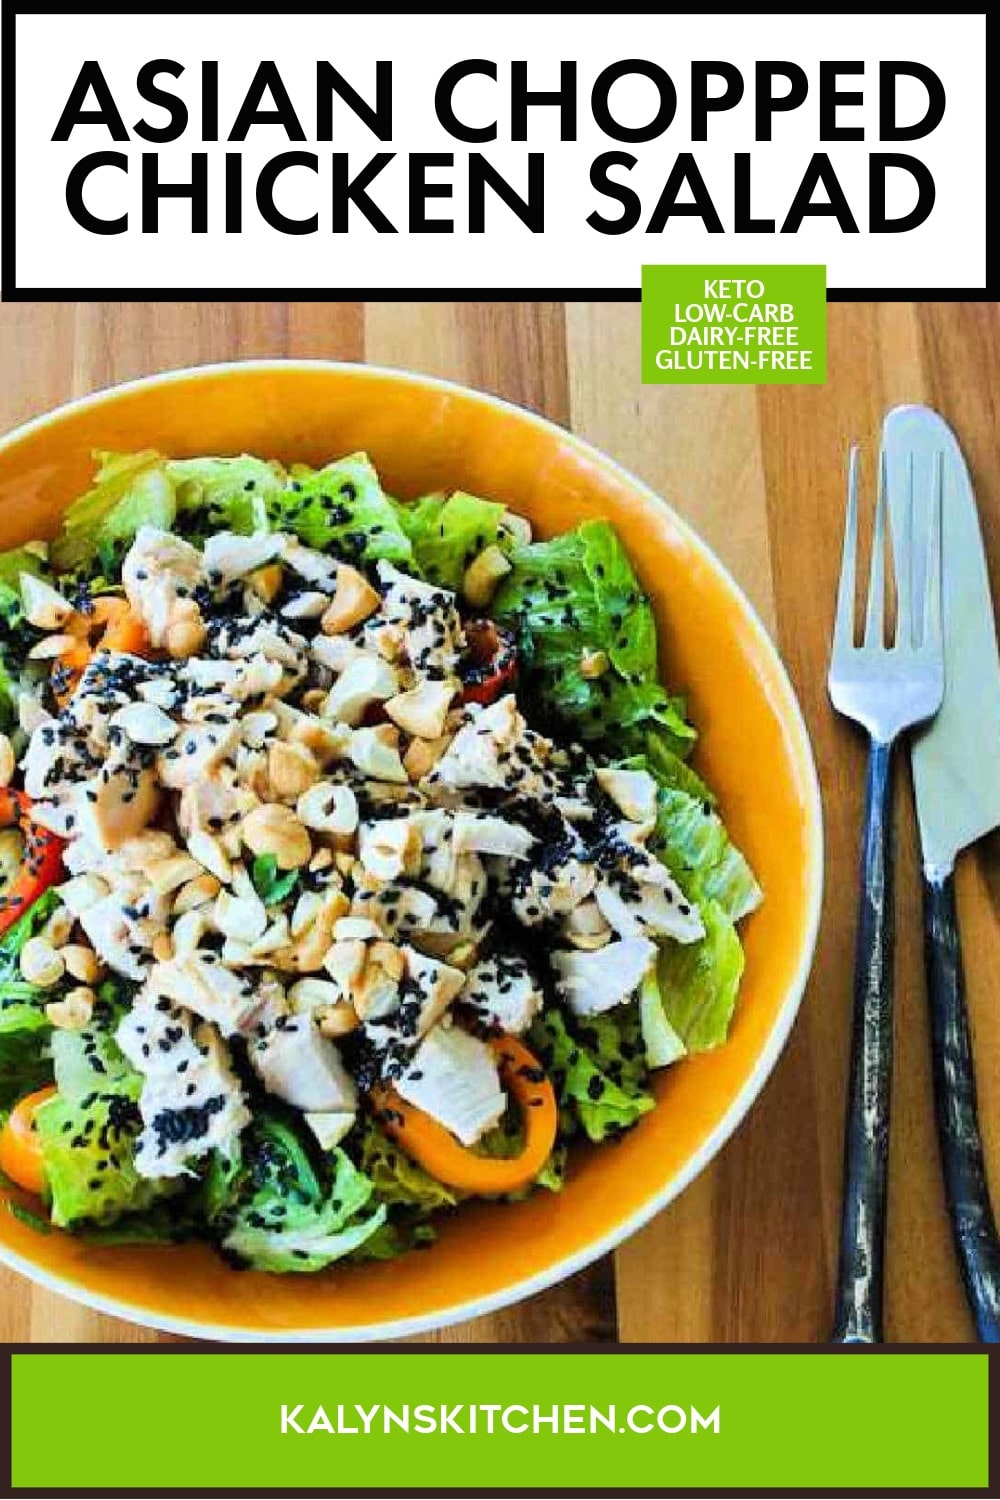 Pinterest image of Asian Chopped Chicken Salad